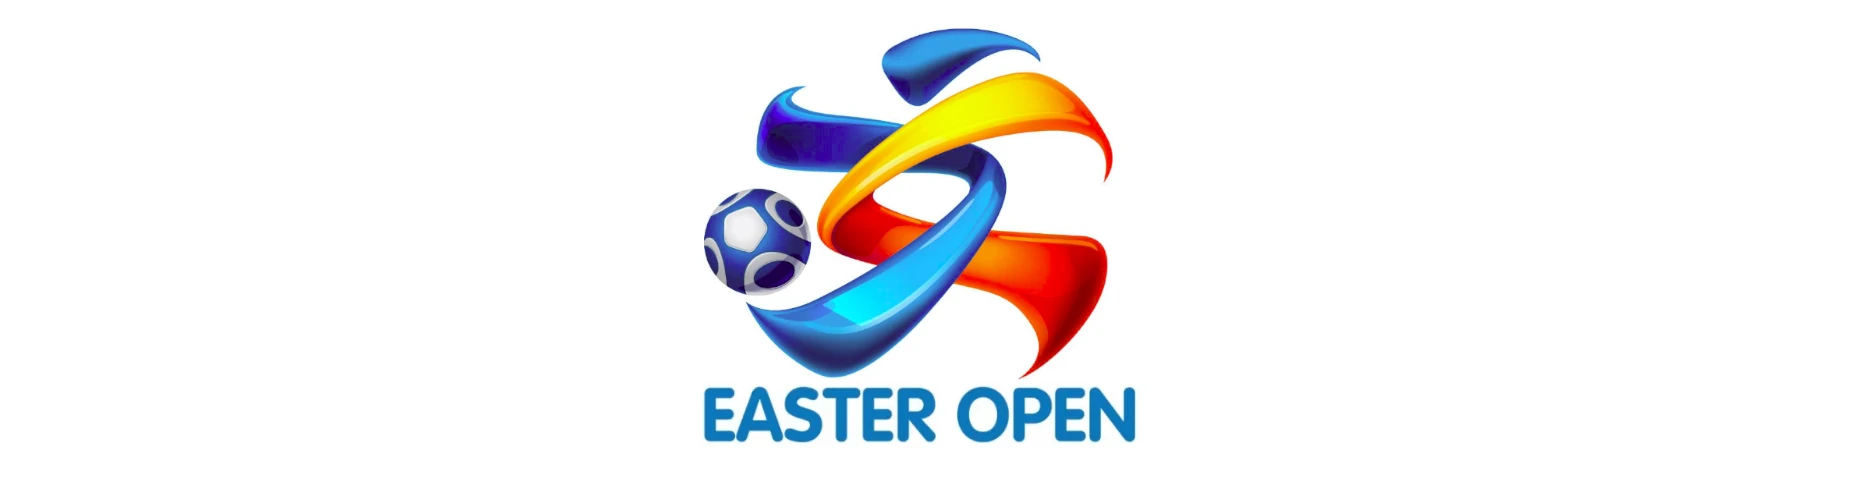 Banner - O7 - Easter Open Zuid - RKSV Odiliapeel - Odiliapeel